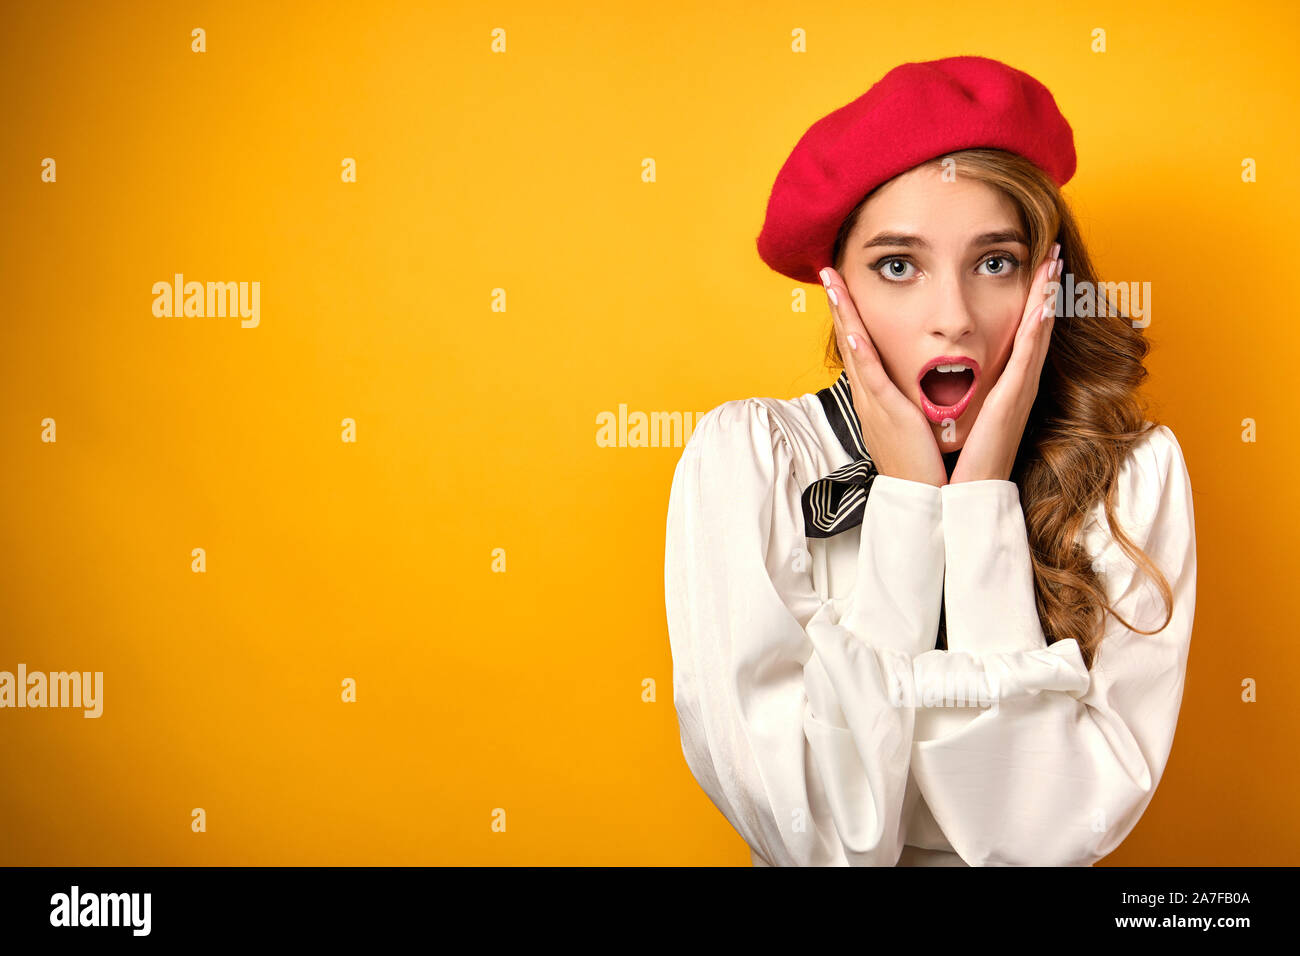 A girl with red lipstick in a white blouse and a red beret is standing opening her mouth in surprise, presses palms to her face Stock Photo